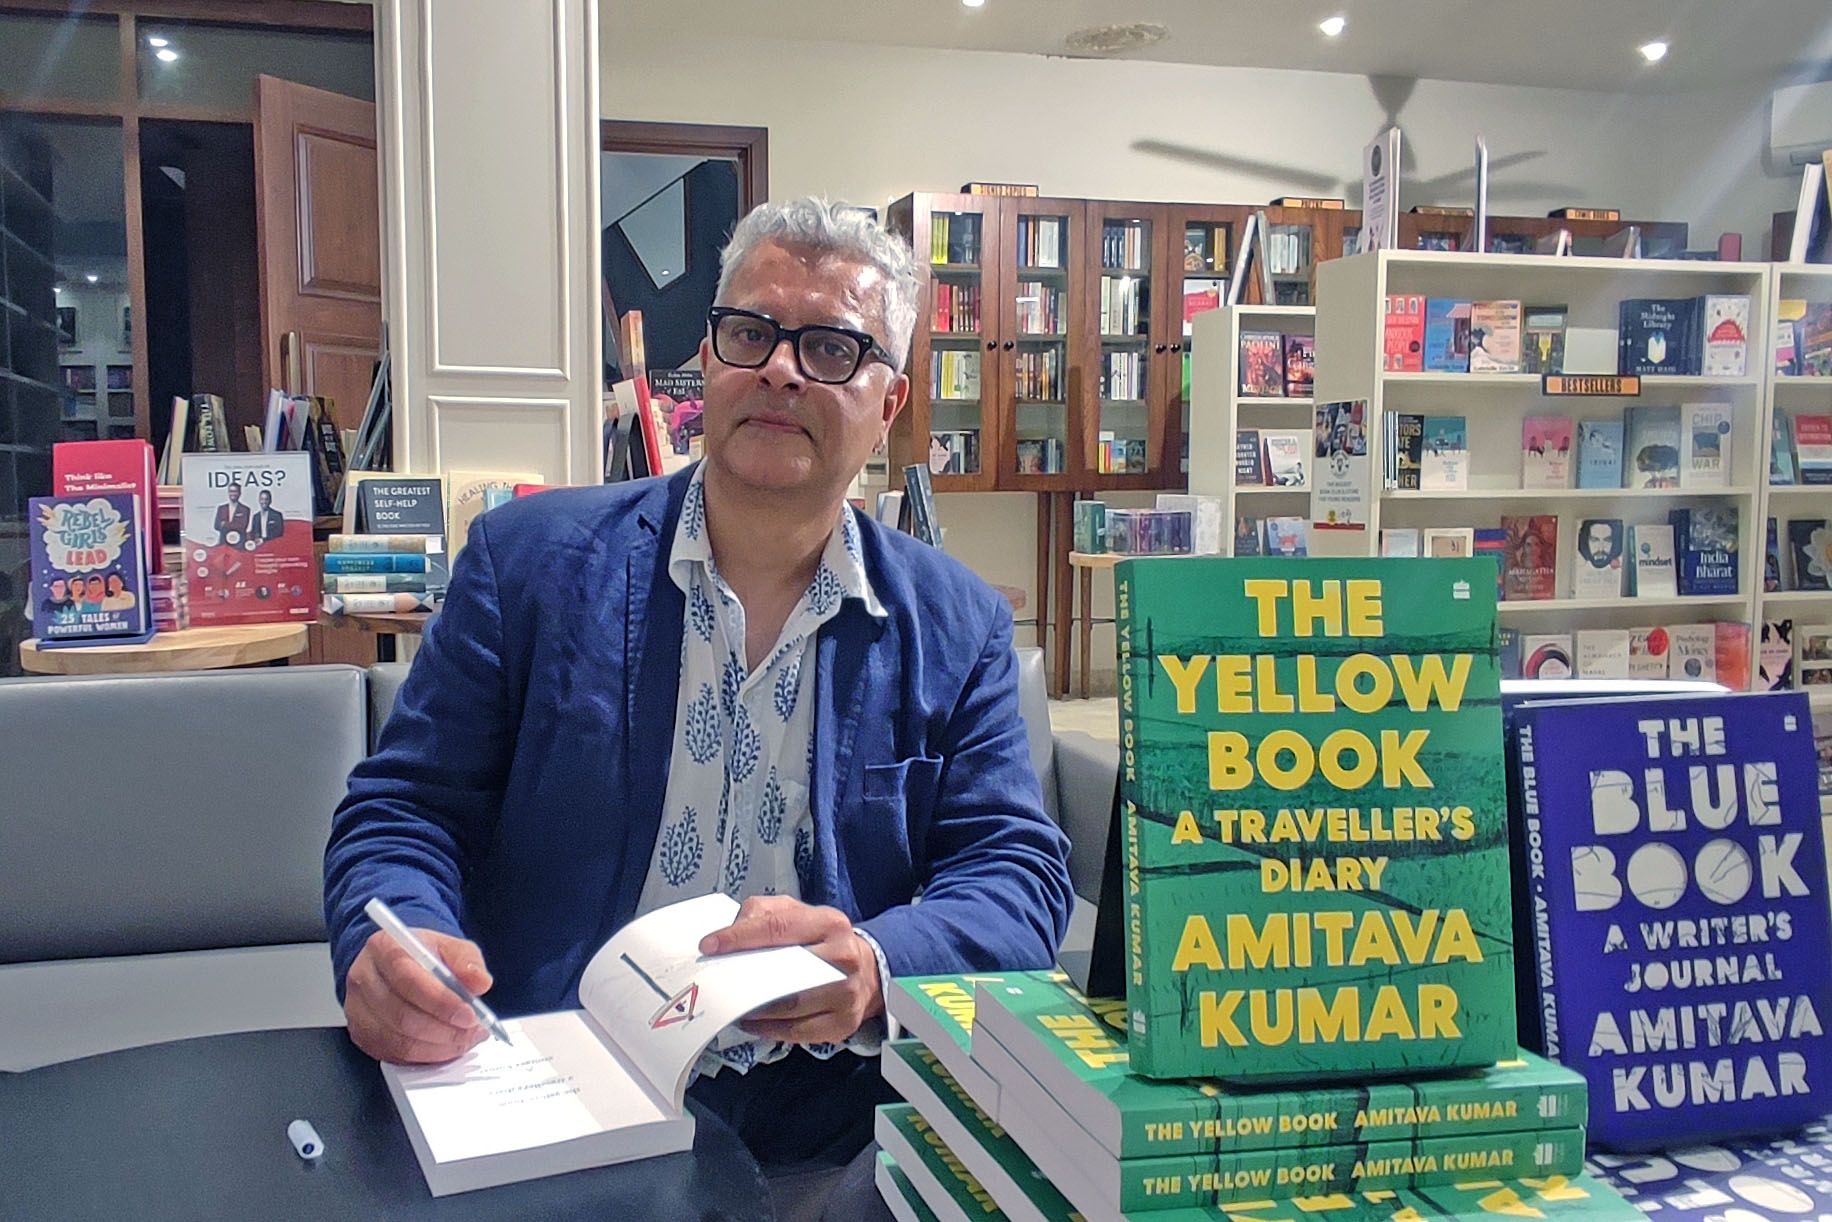 Interview: If You Read, You Will Become a Writer, Says Author Amitava Kumar